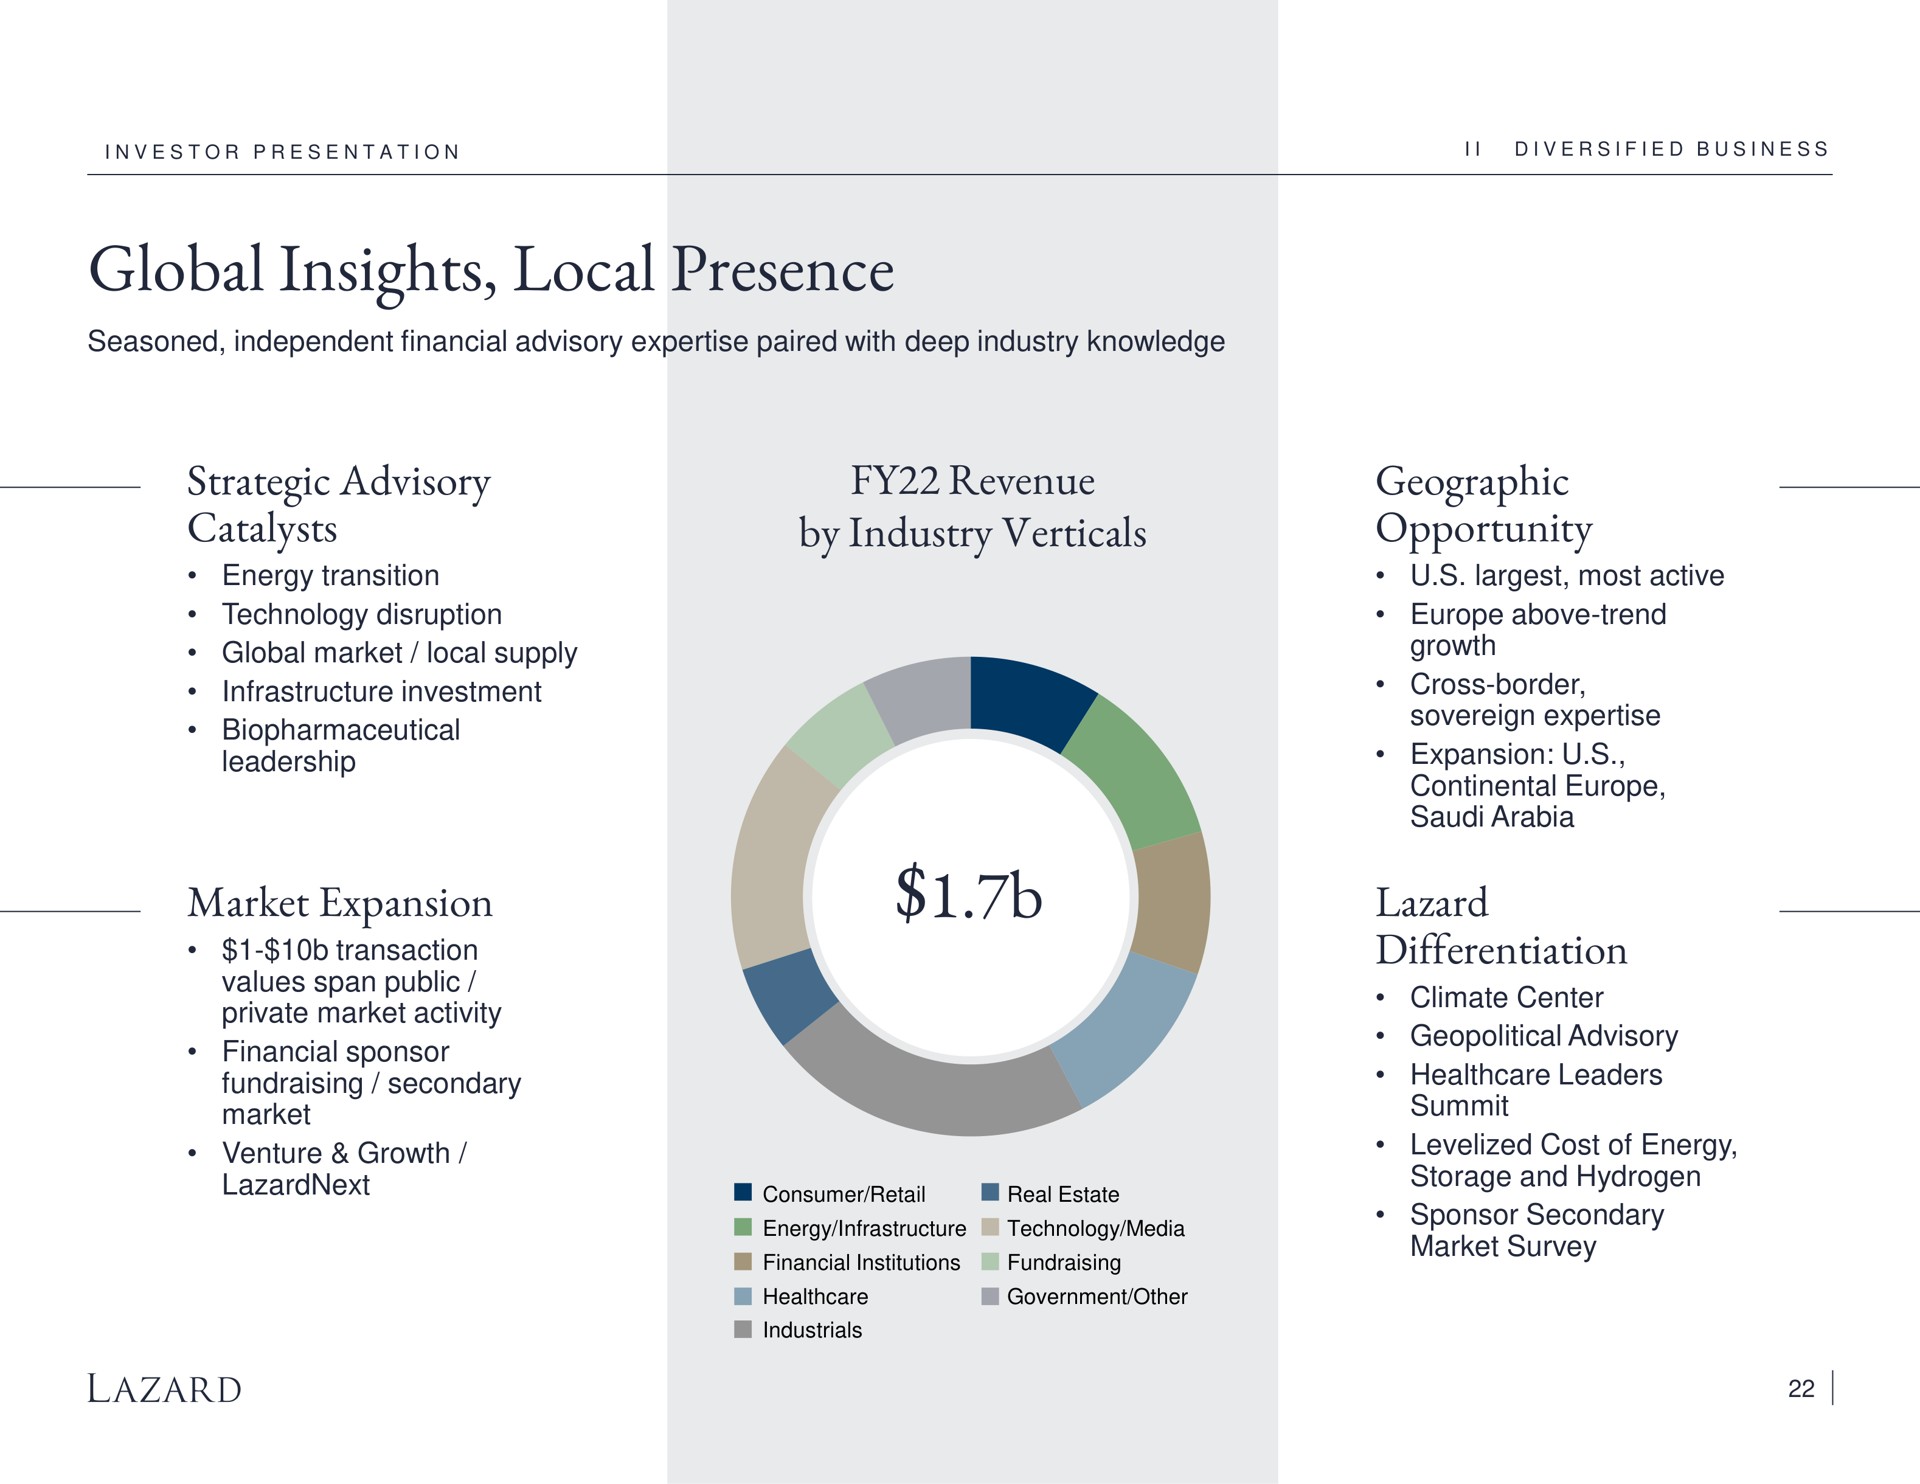 global insights local presence strategic advisory catalysts market expansion revenue by industry verticals geographic opportunity differentiation | Lazard